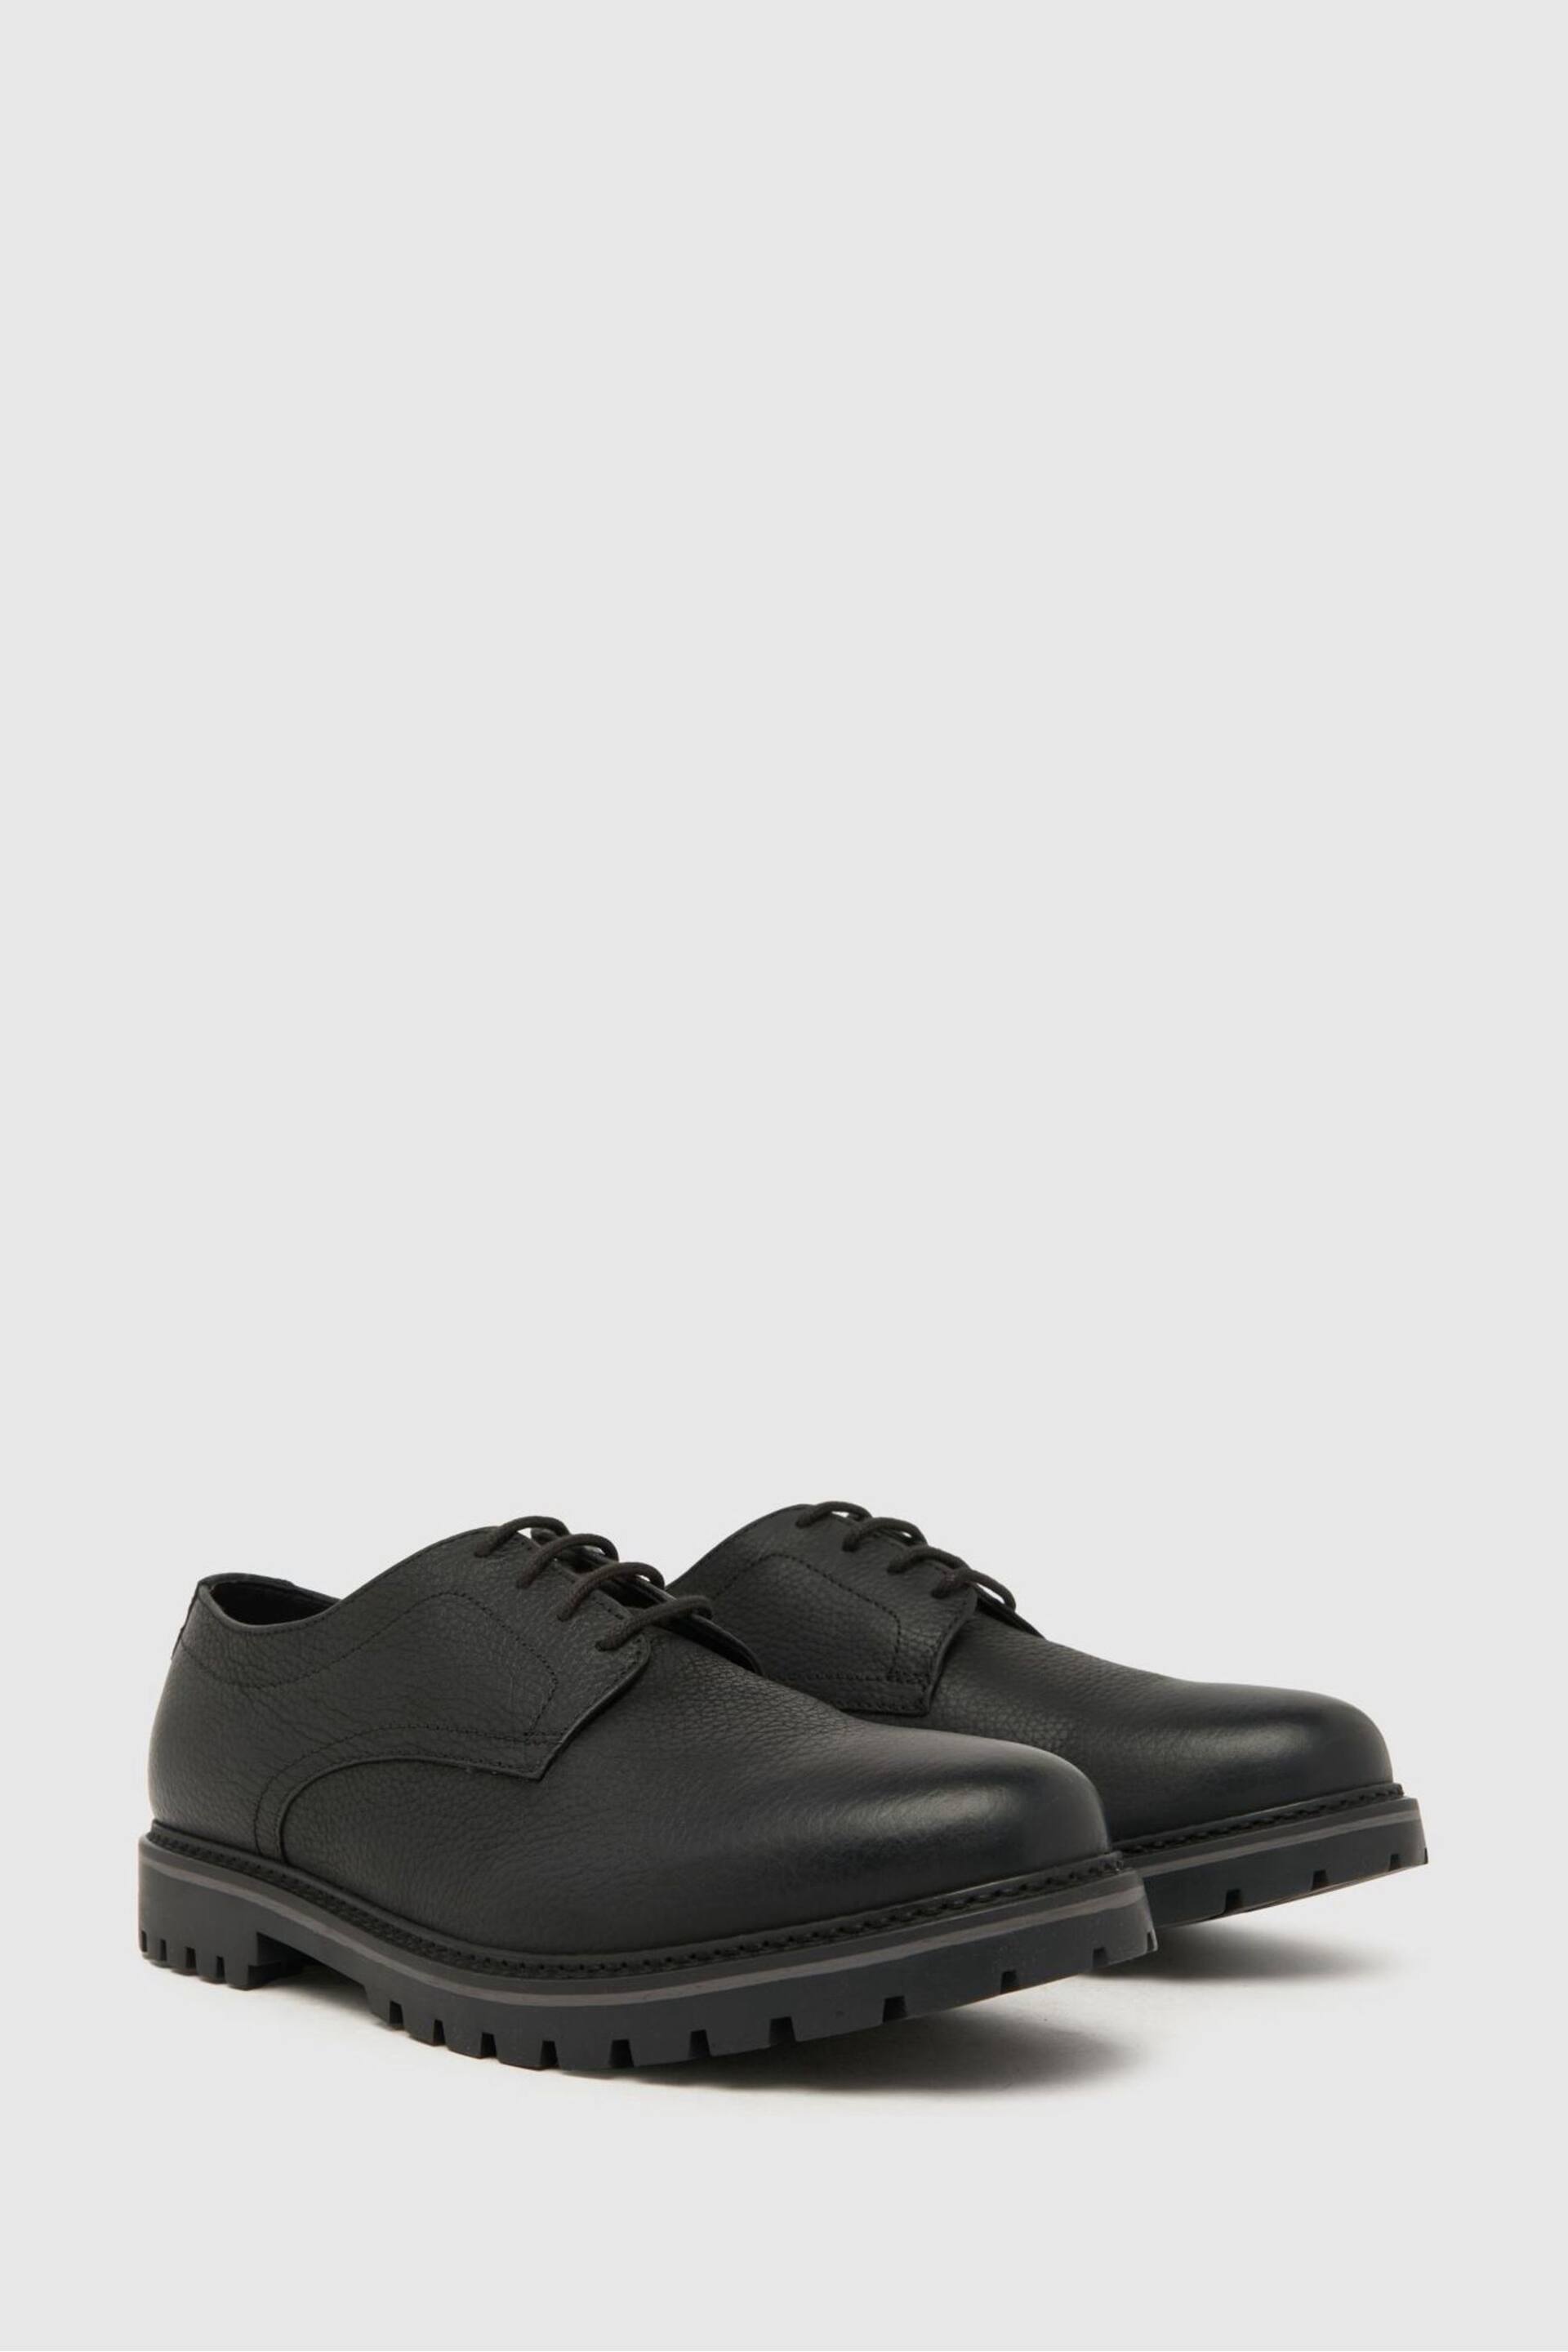 Schuh Paxon Leather Lace-Up Black Shoes - Image 3 of 4